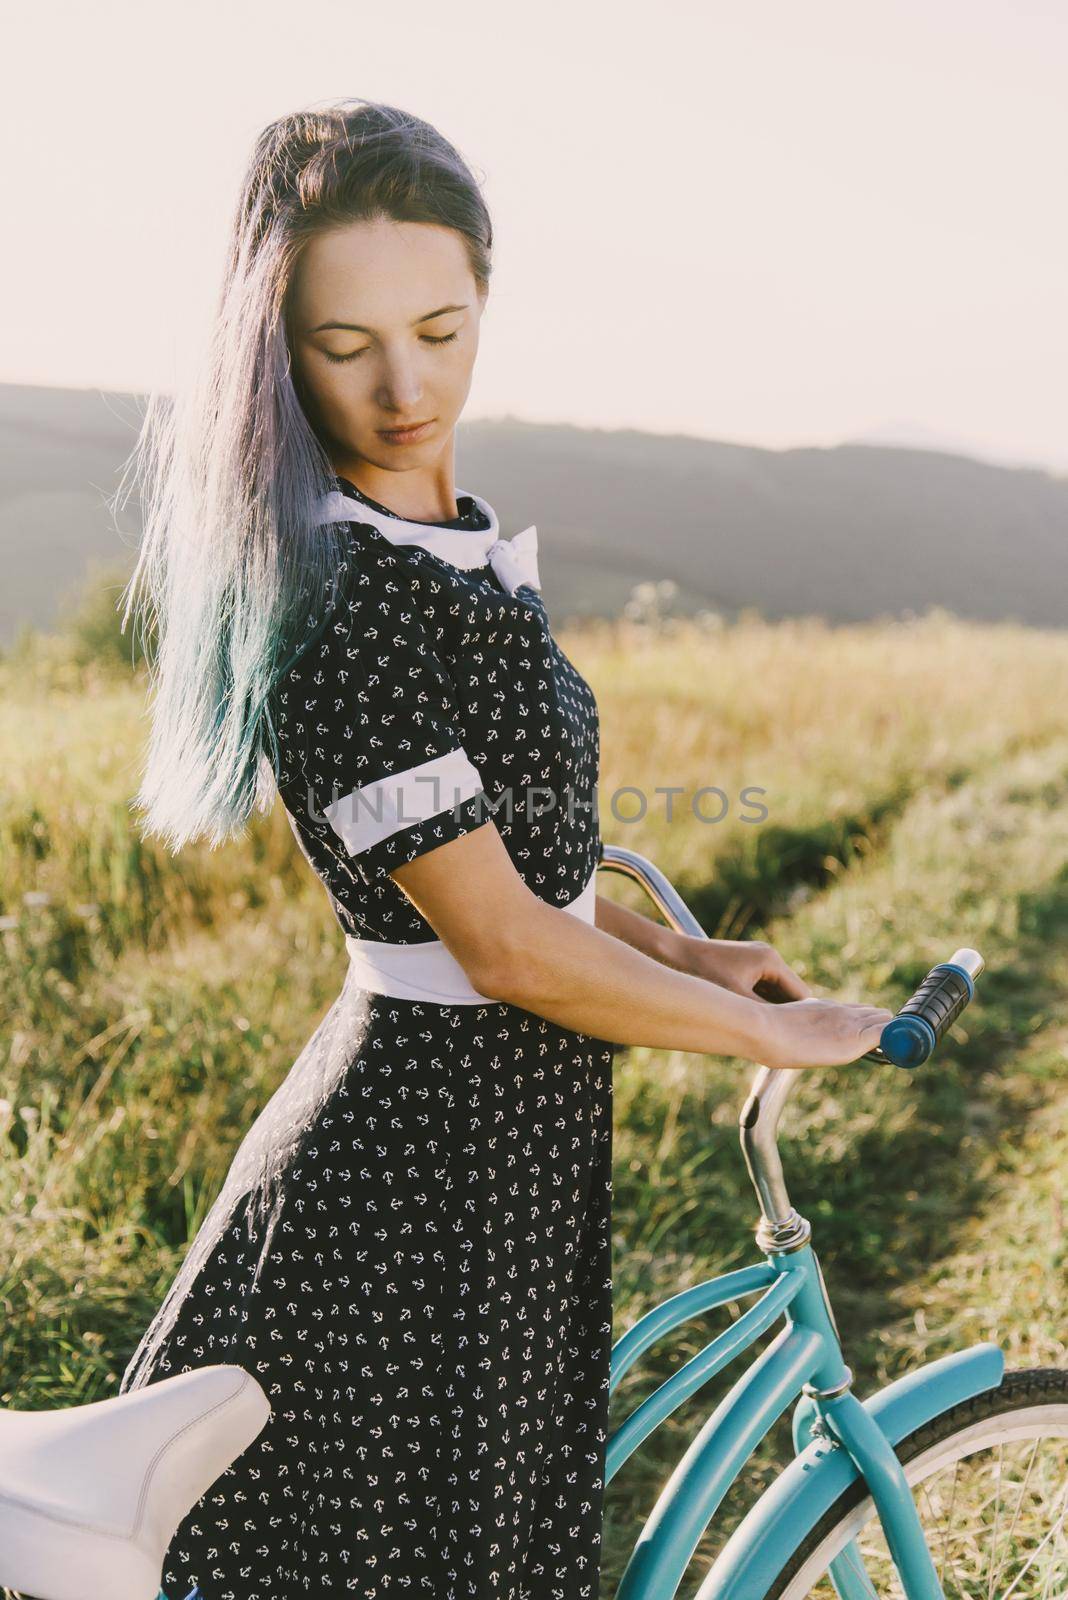 Beautiful young woman in dress standing with bicycle cruiser outdoor.